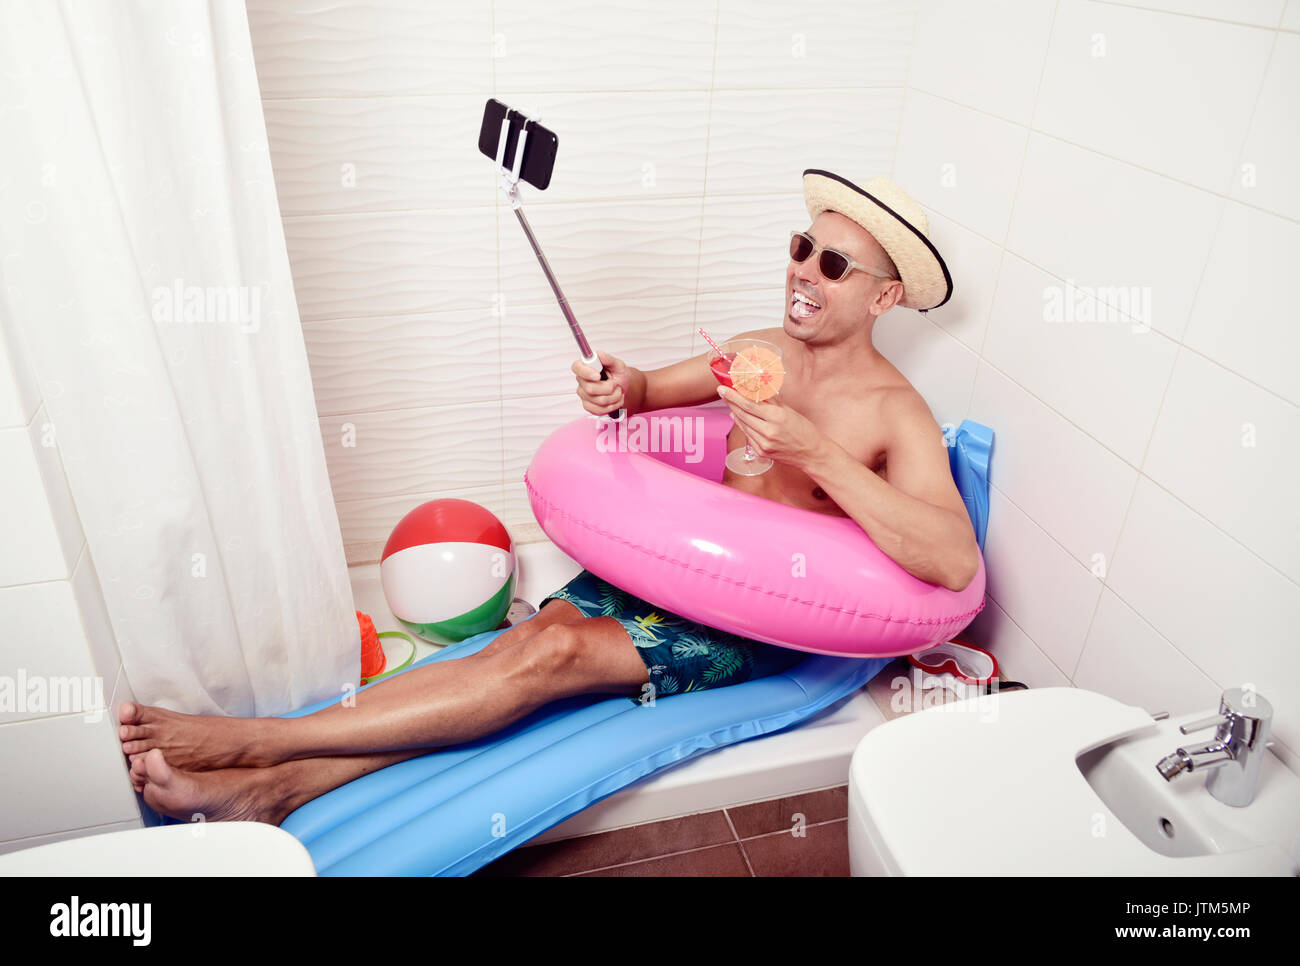 a young caucasian man wearing sunglasses, a straw hat and a pink swim ring in a blue air mattress placed in the shower of a bathroom takes a selfie wi Stock Photo